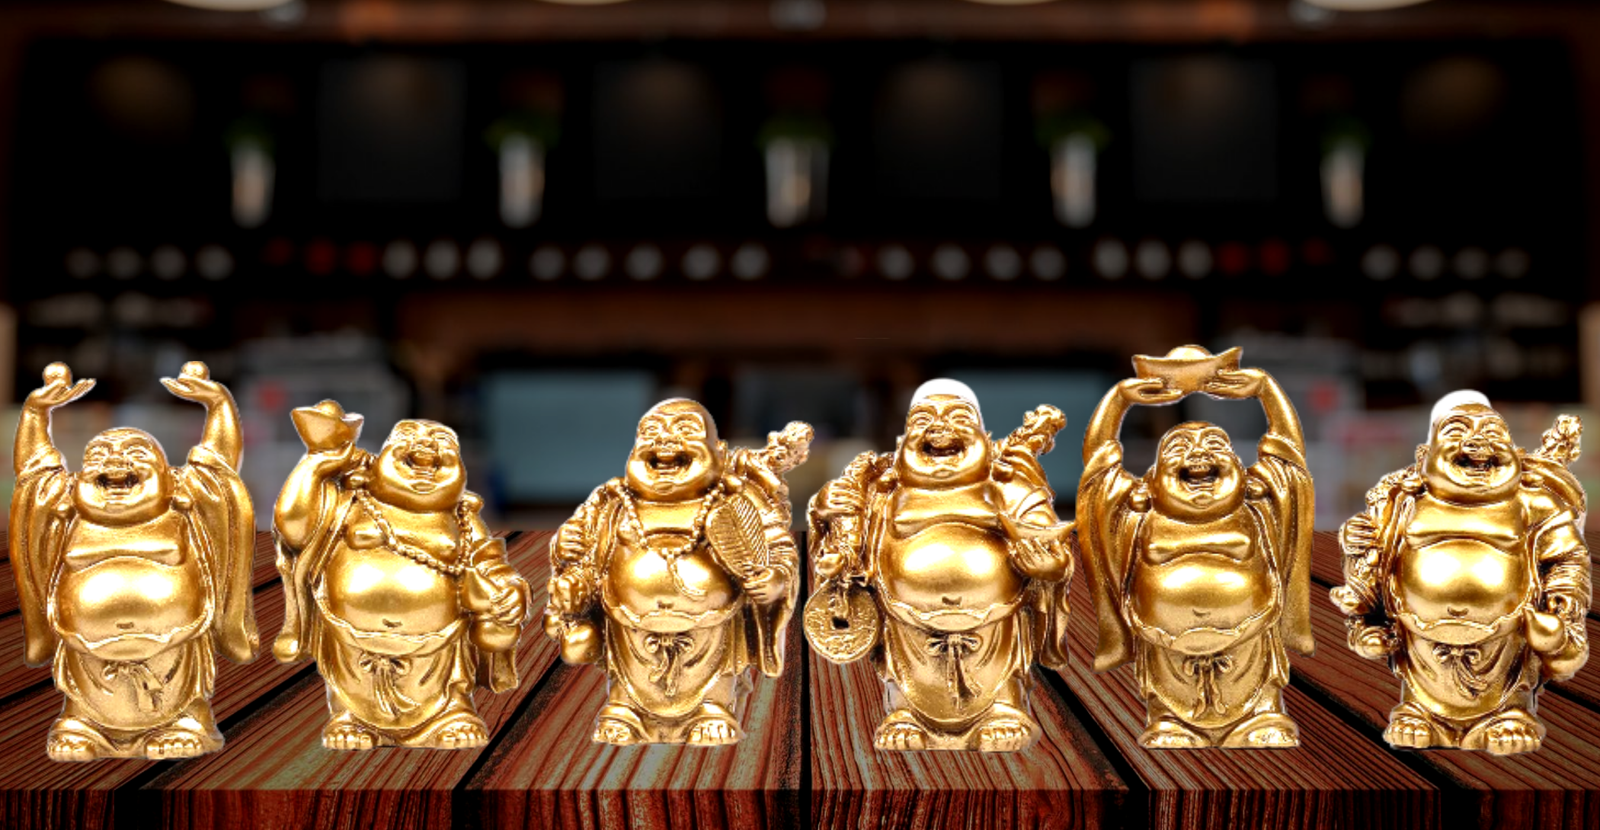 Buddha Statue for Home Decor: How to Choose & Where to Display Them